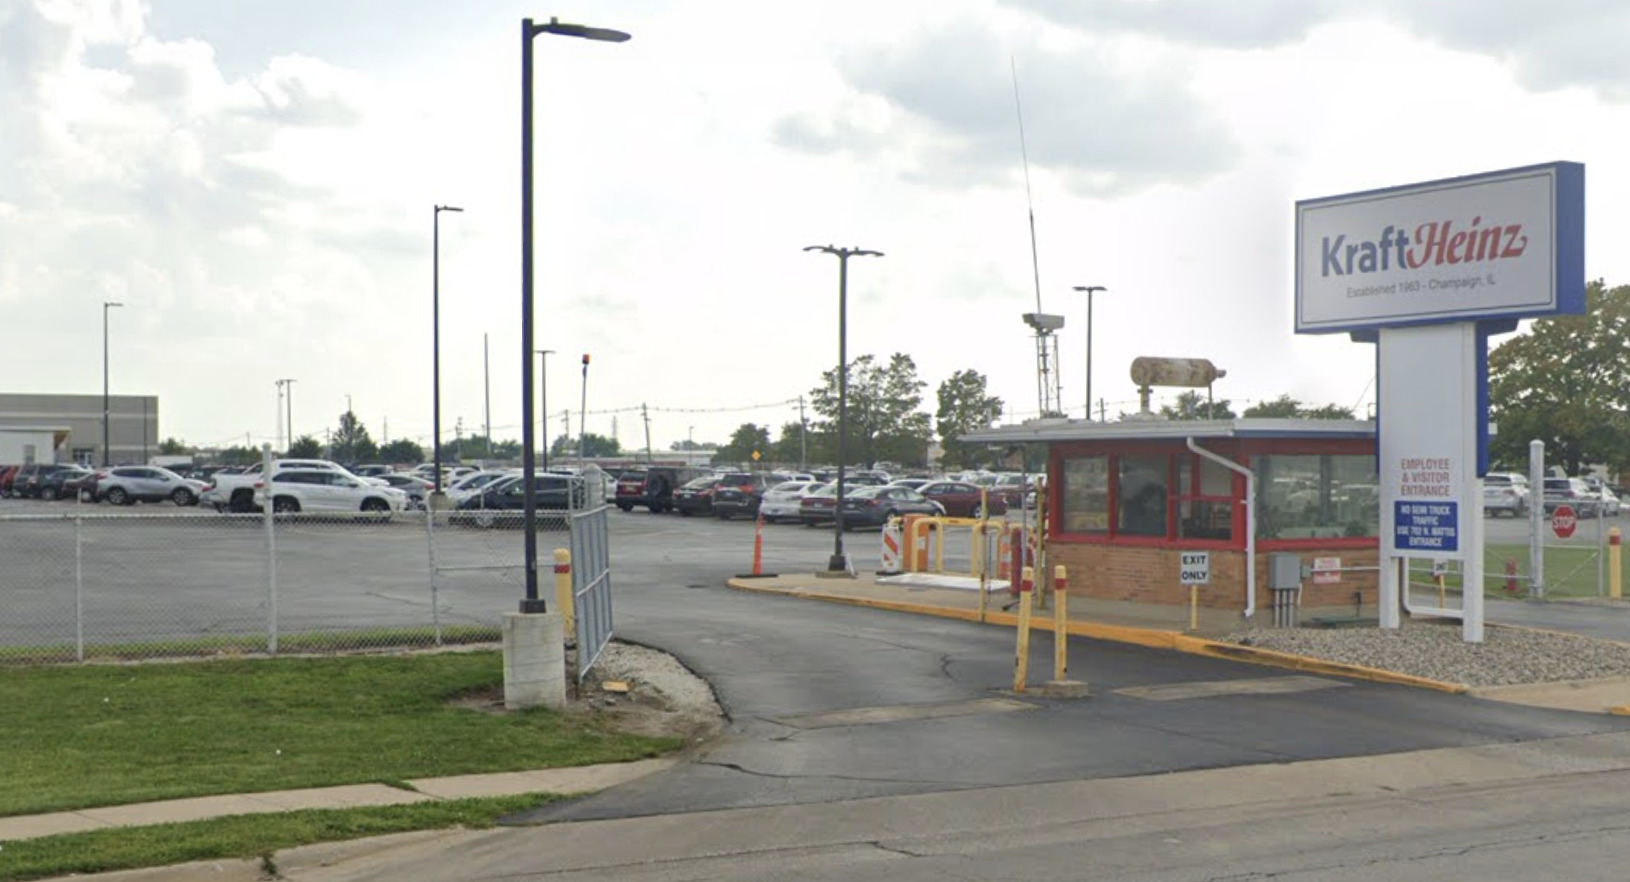 The entrance for the Kraft Heinz factory in Champaign, IL. A security station with brick foundation and red trim sits behind a large white and blue sign the reads KraftHeinz. Beyond the entrance is a large parking lot with many cars parked.